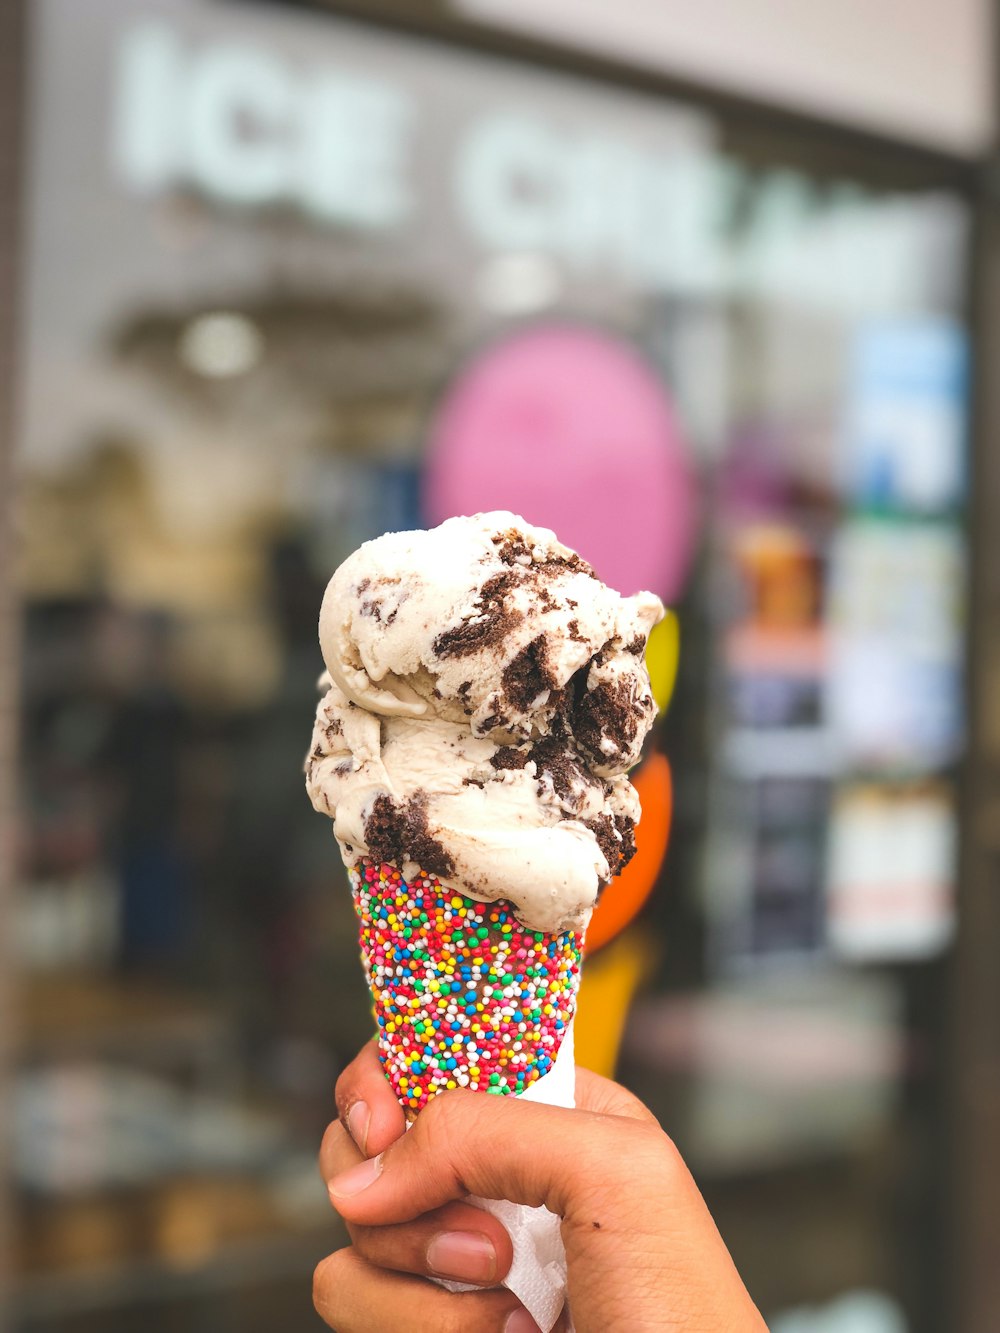 person holding candy sprinkled cone with ice cream